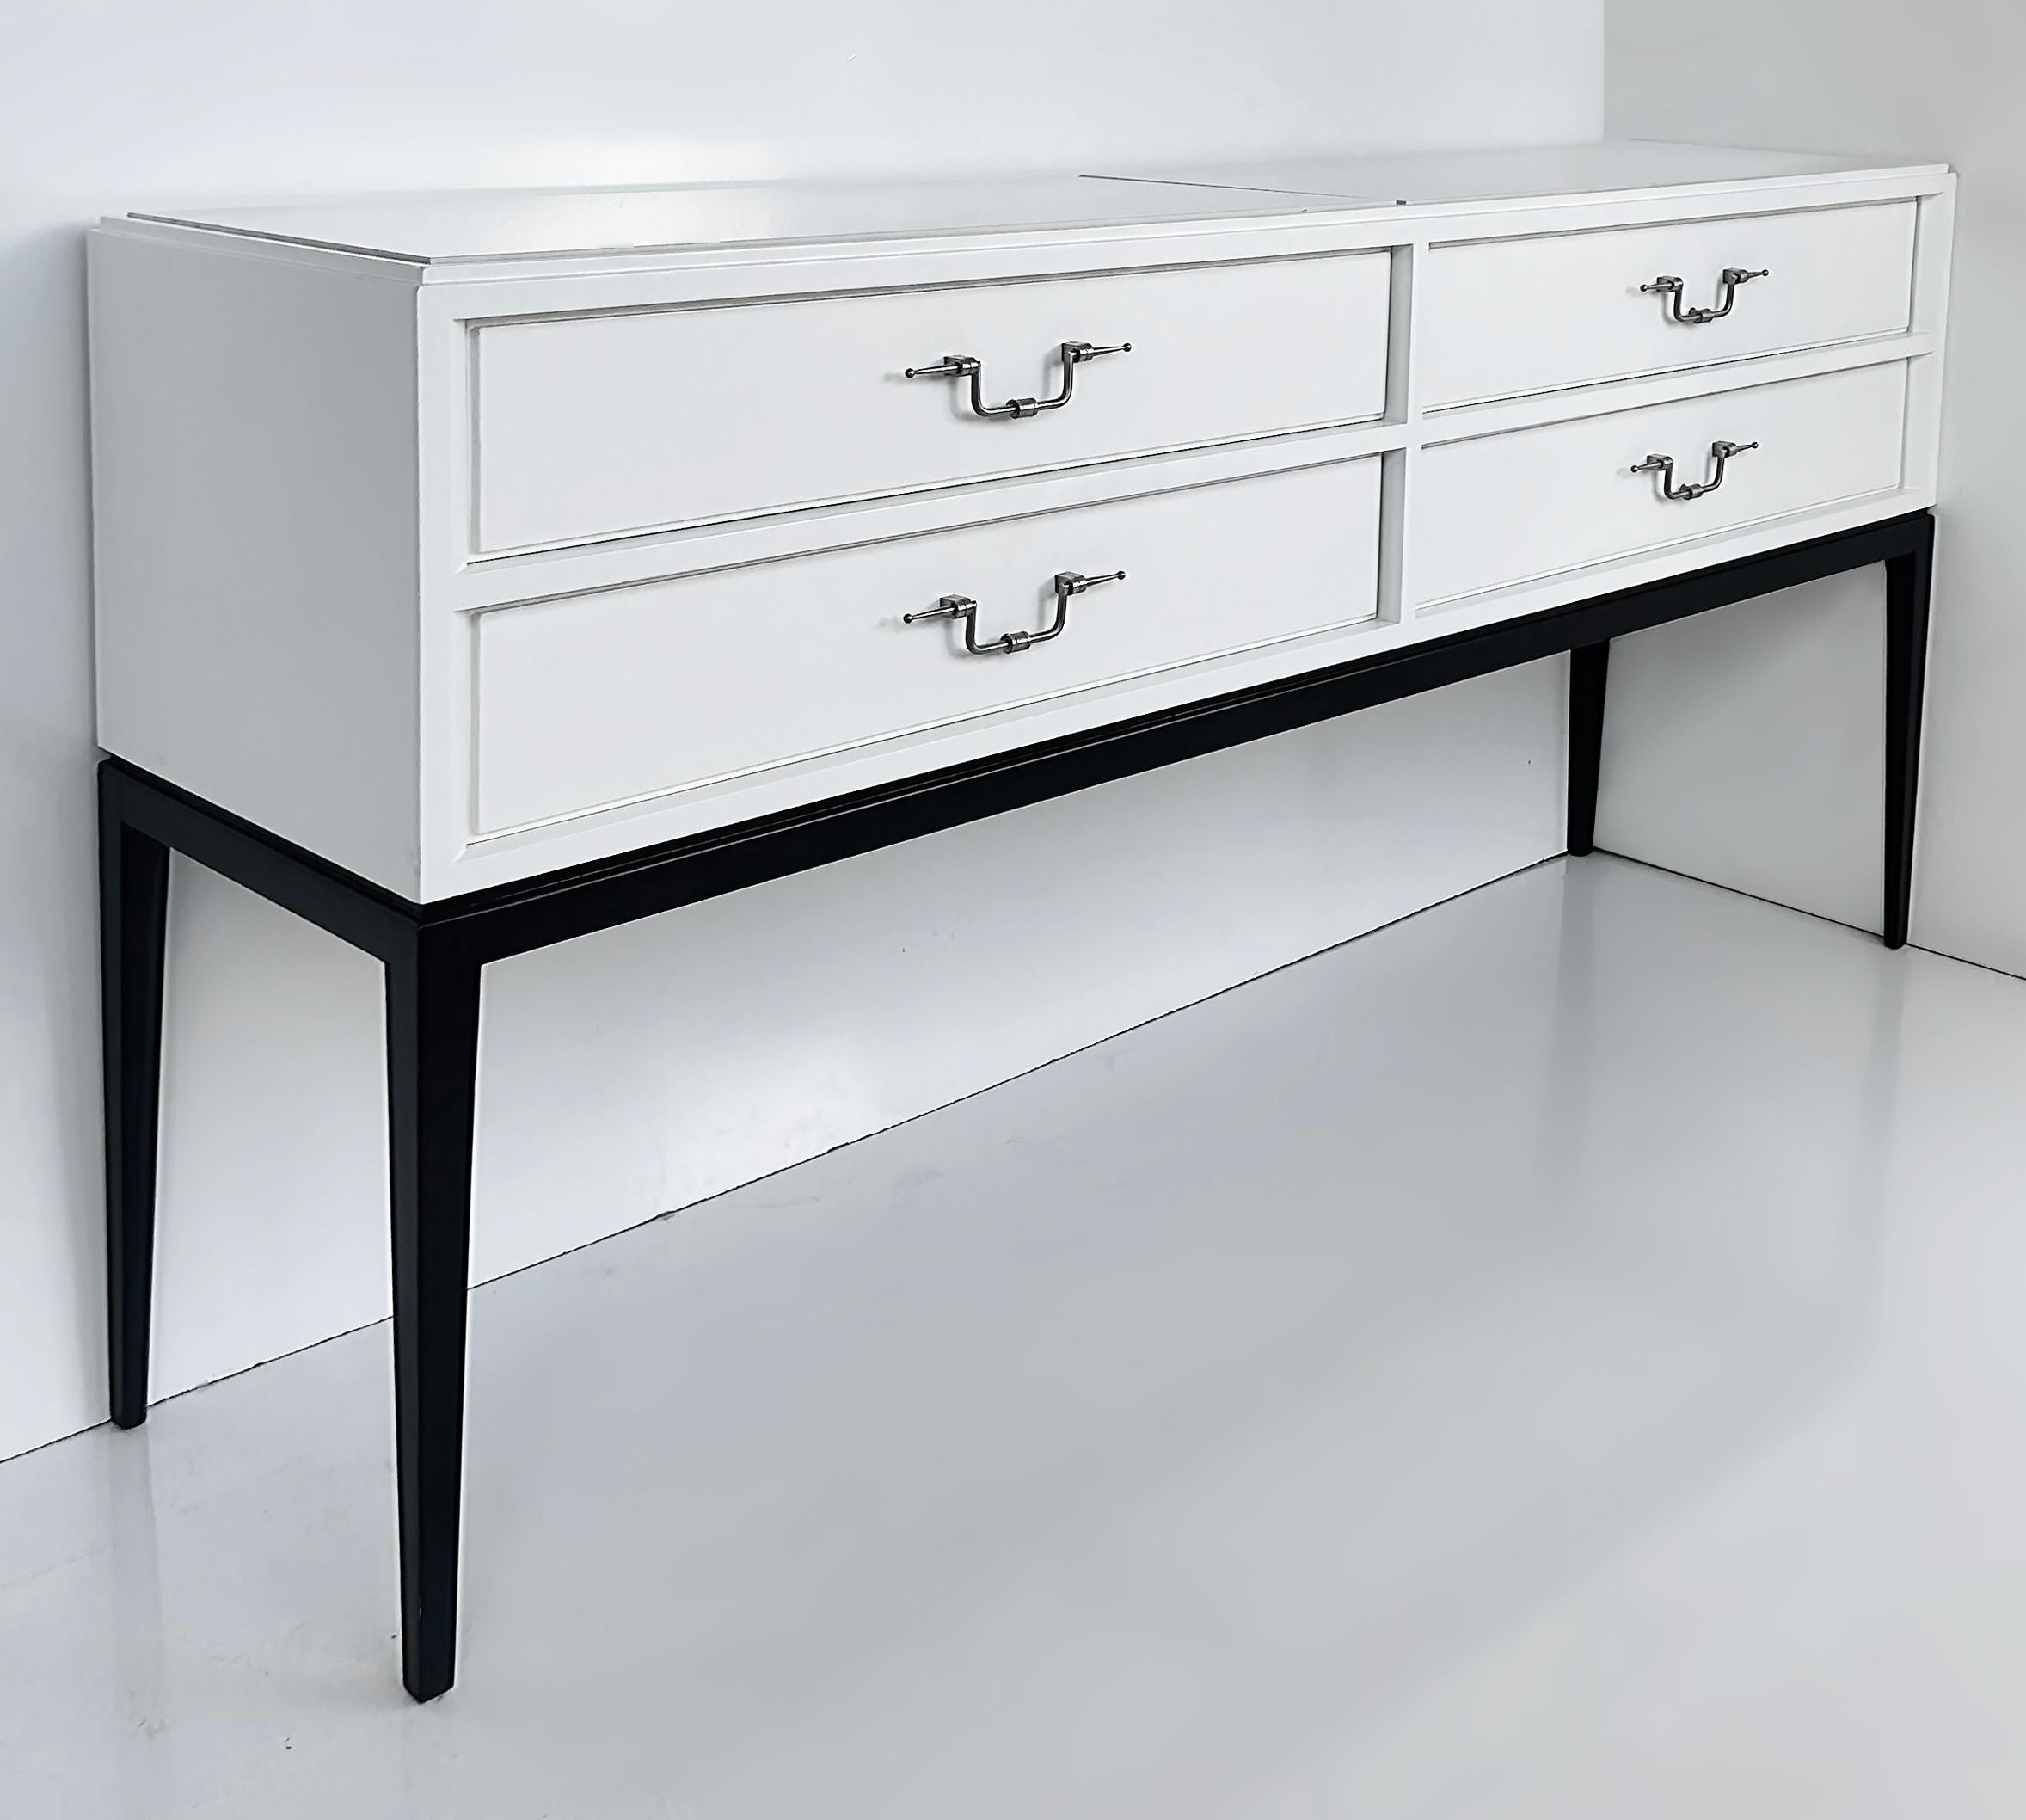 Tommi Parzinger Originals 4-Drawer Lacquered Console Credenza

Offered for sale is an original white lacquered four-drawer console credenda from Tommi Parzinger.  This piece is part of the estate of a socialite who was friends with Parzinger and had